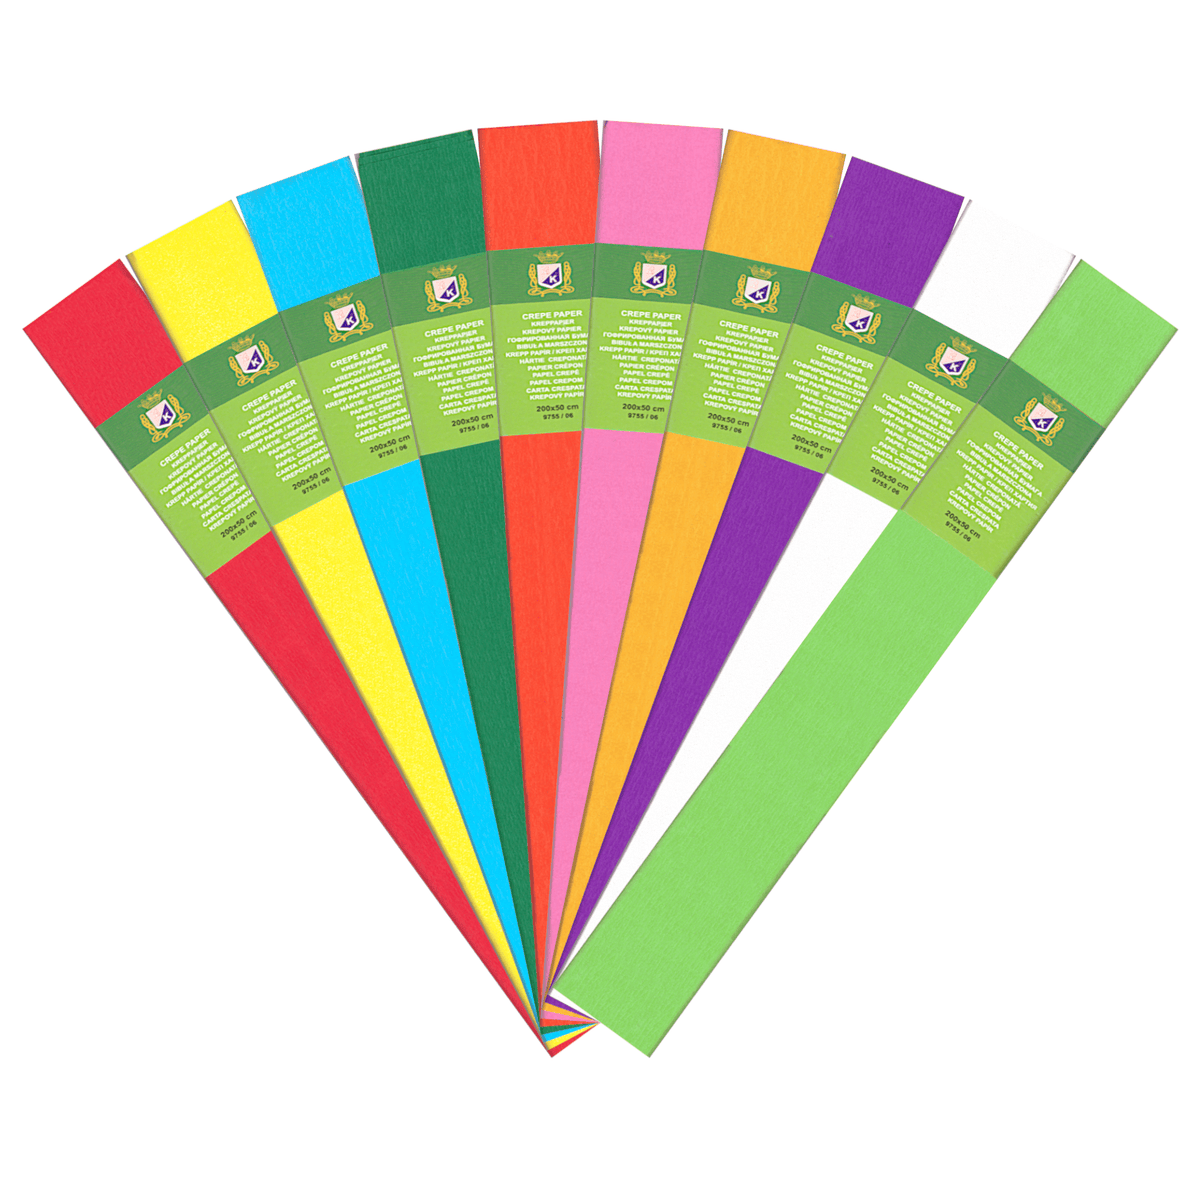 Gimboo - Pastel Crepe Paper 10 Rolls 25 x 200 cm Assorted/Colourful Ribbons  Crepe Paper/Ideal for Creative Hobbies / 1 Pack - 10 Rolls/Assorted Colours  : : Home & Kitchen